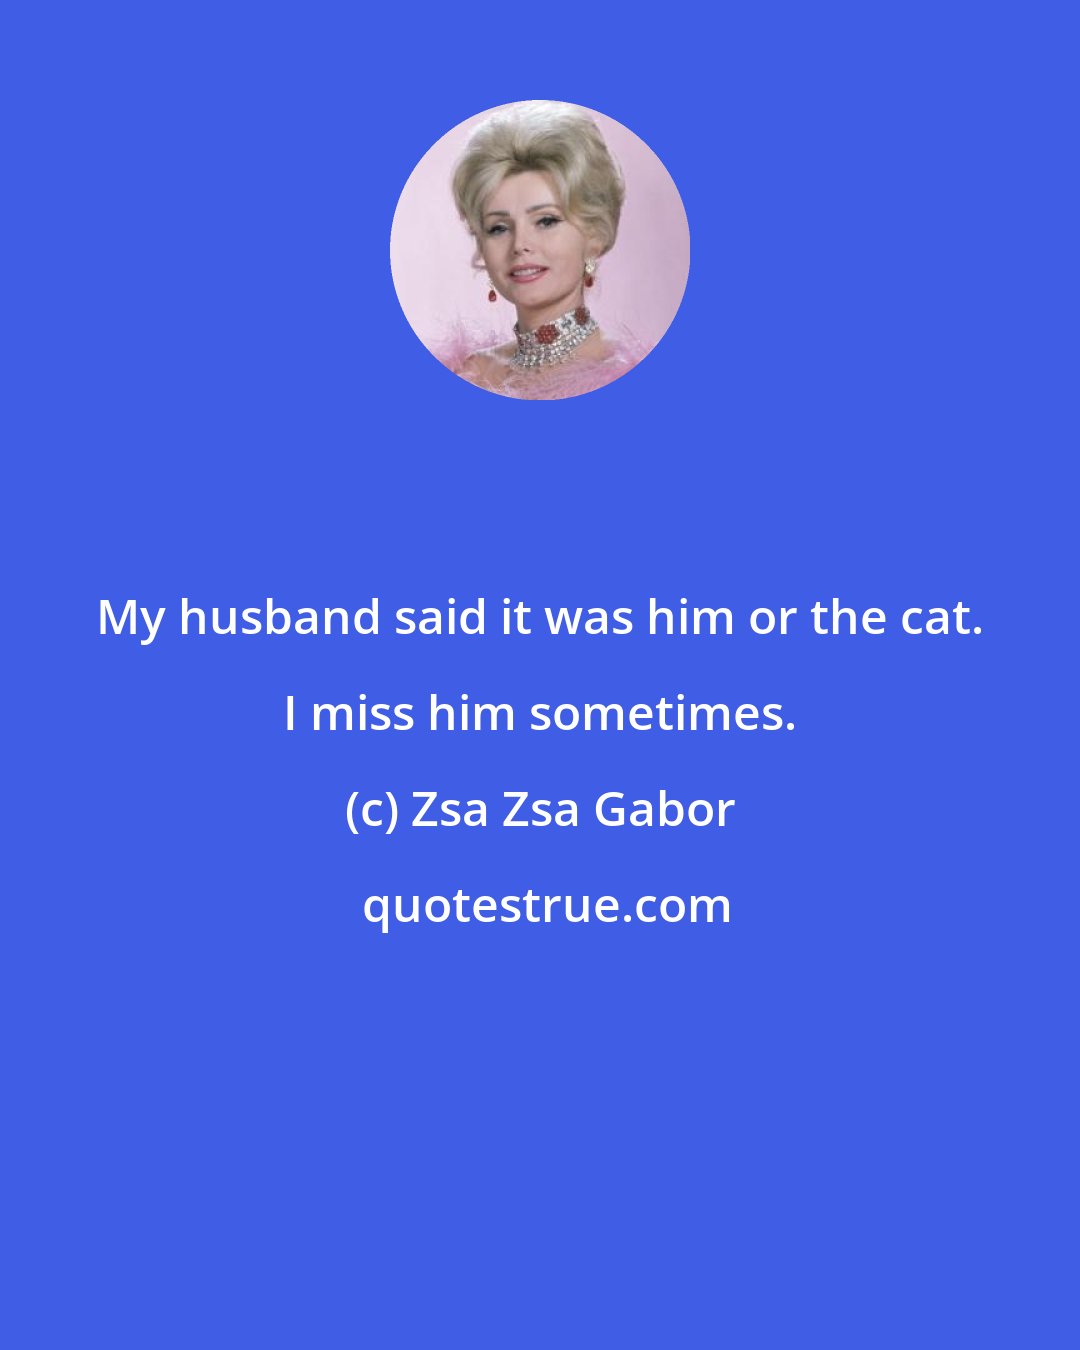 Zsa Zsa Gabor: My husband said it was him or the cat. I miss him sometimes.